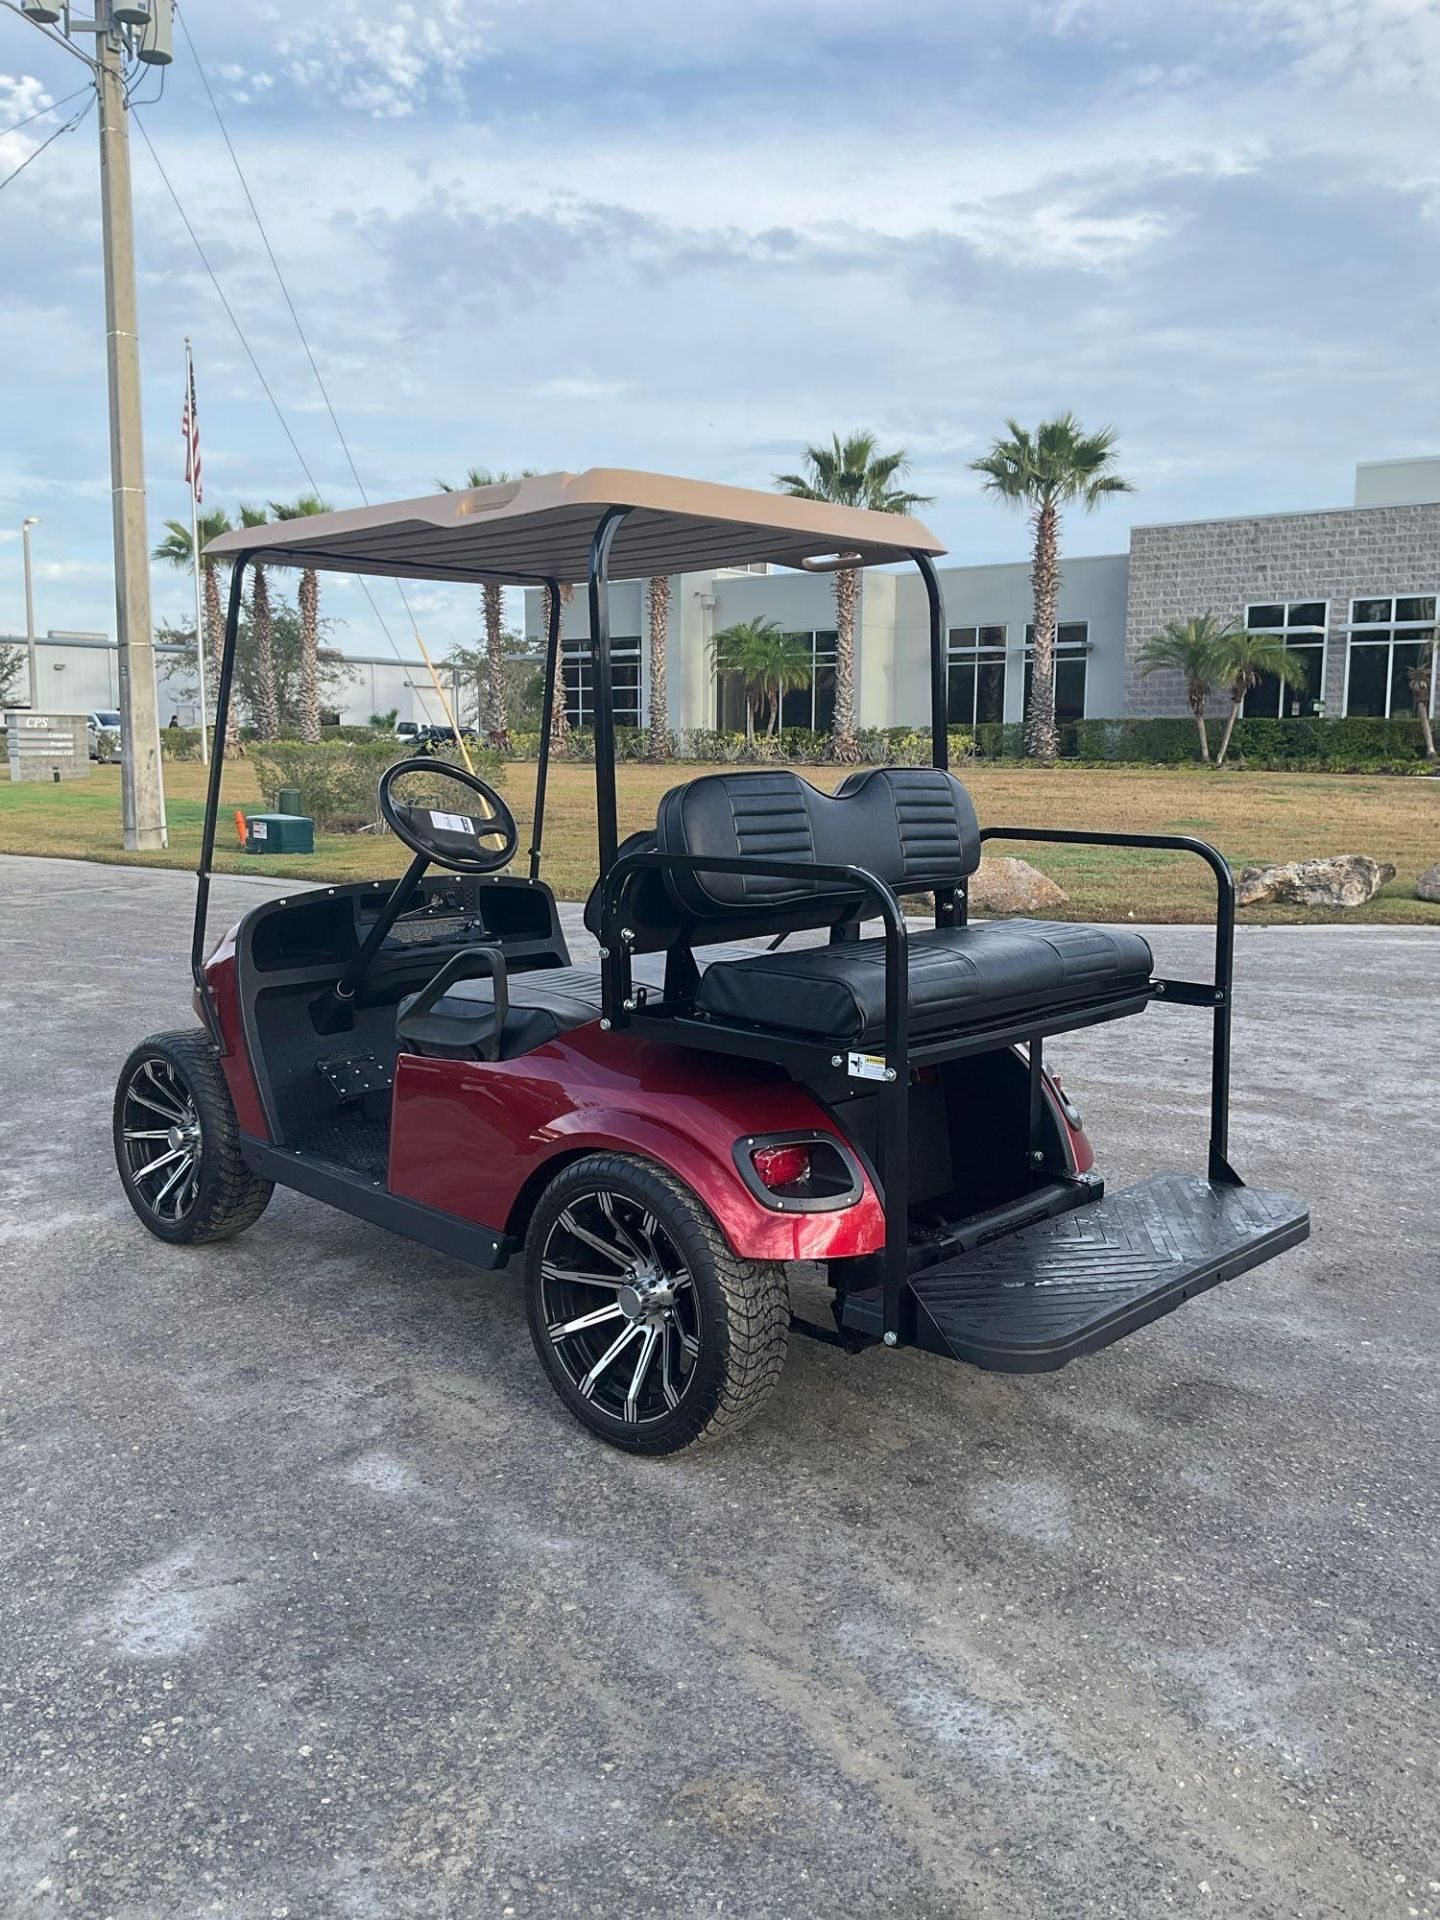 EZ-GO GOLF CART , ELECTRIC, BACK SEAT FOLD DOWN TO FLAT BED, BATTERY CHARGER INCLUDED, BILL OF SALE - Image 3 of 13